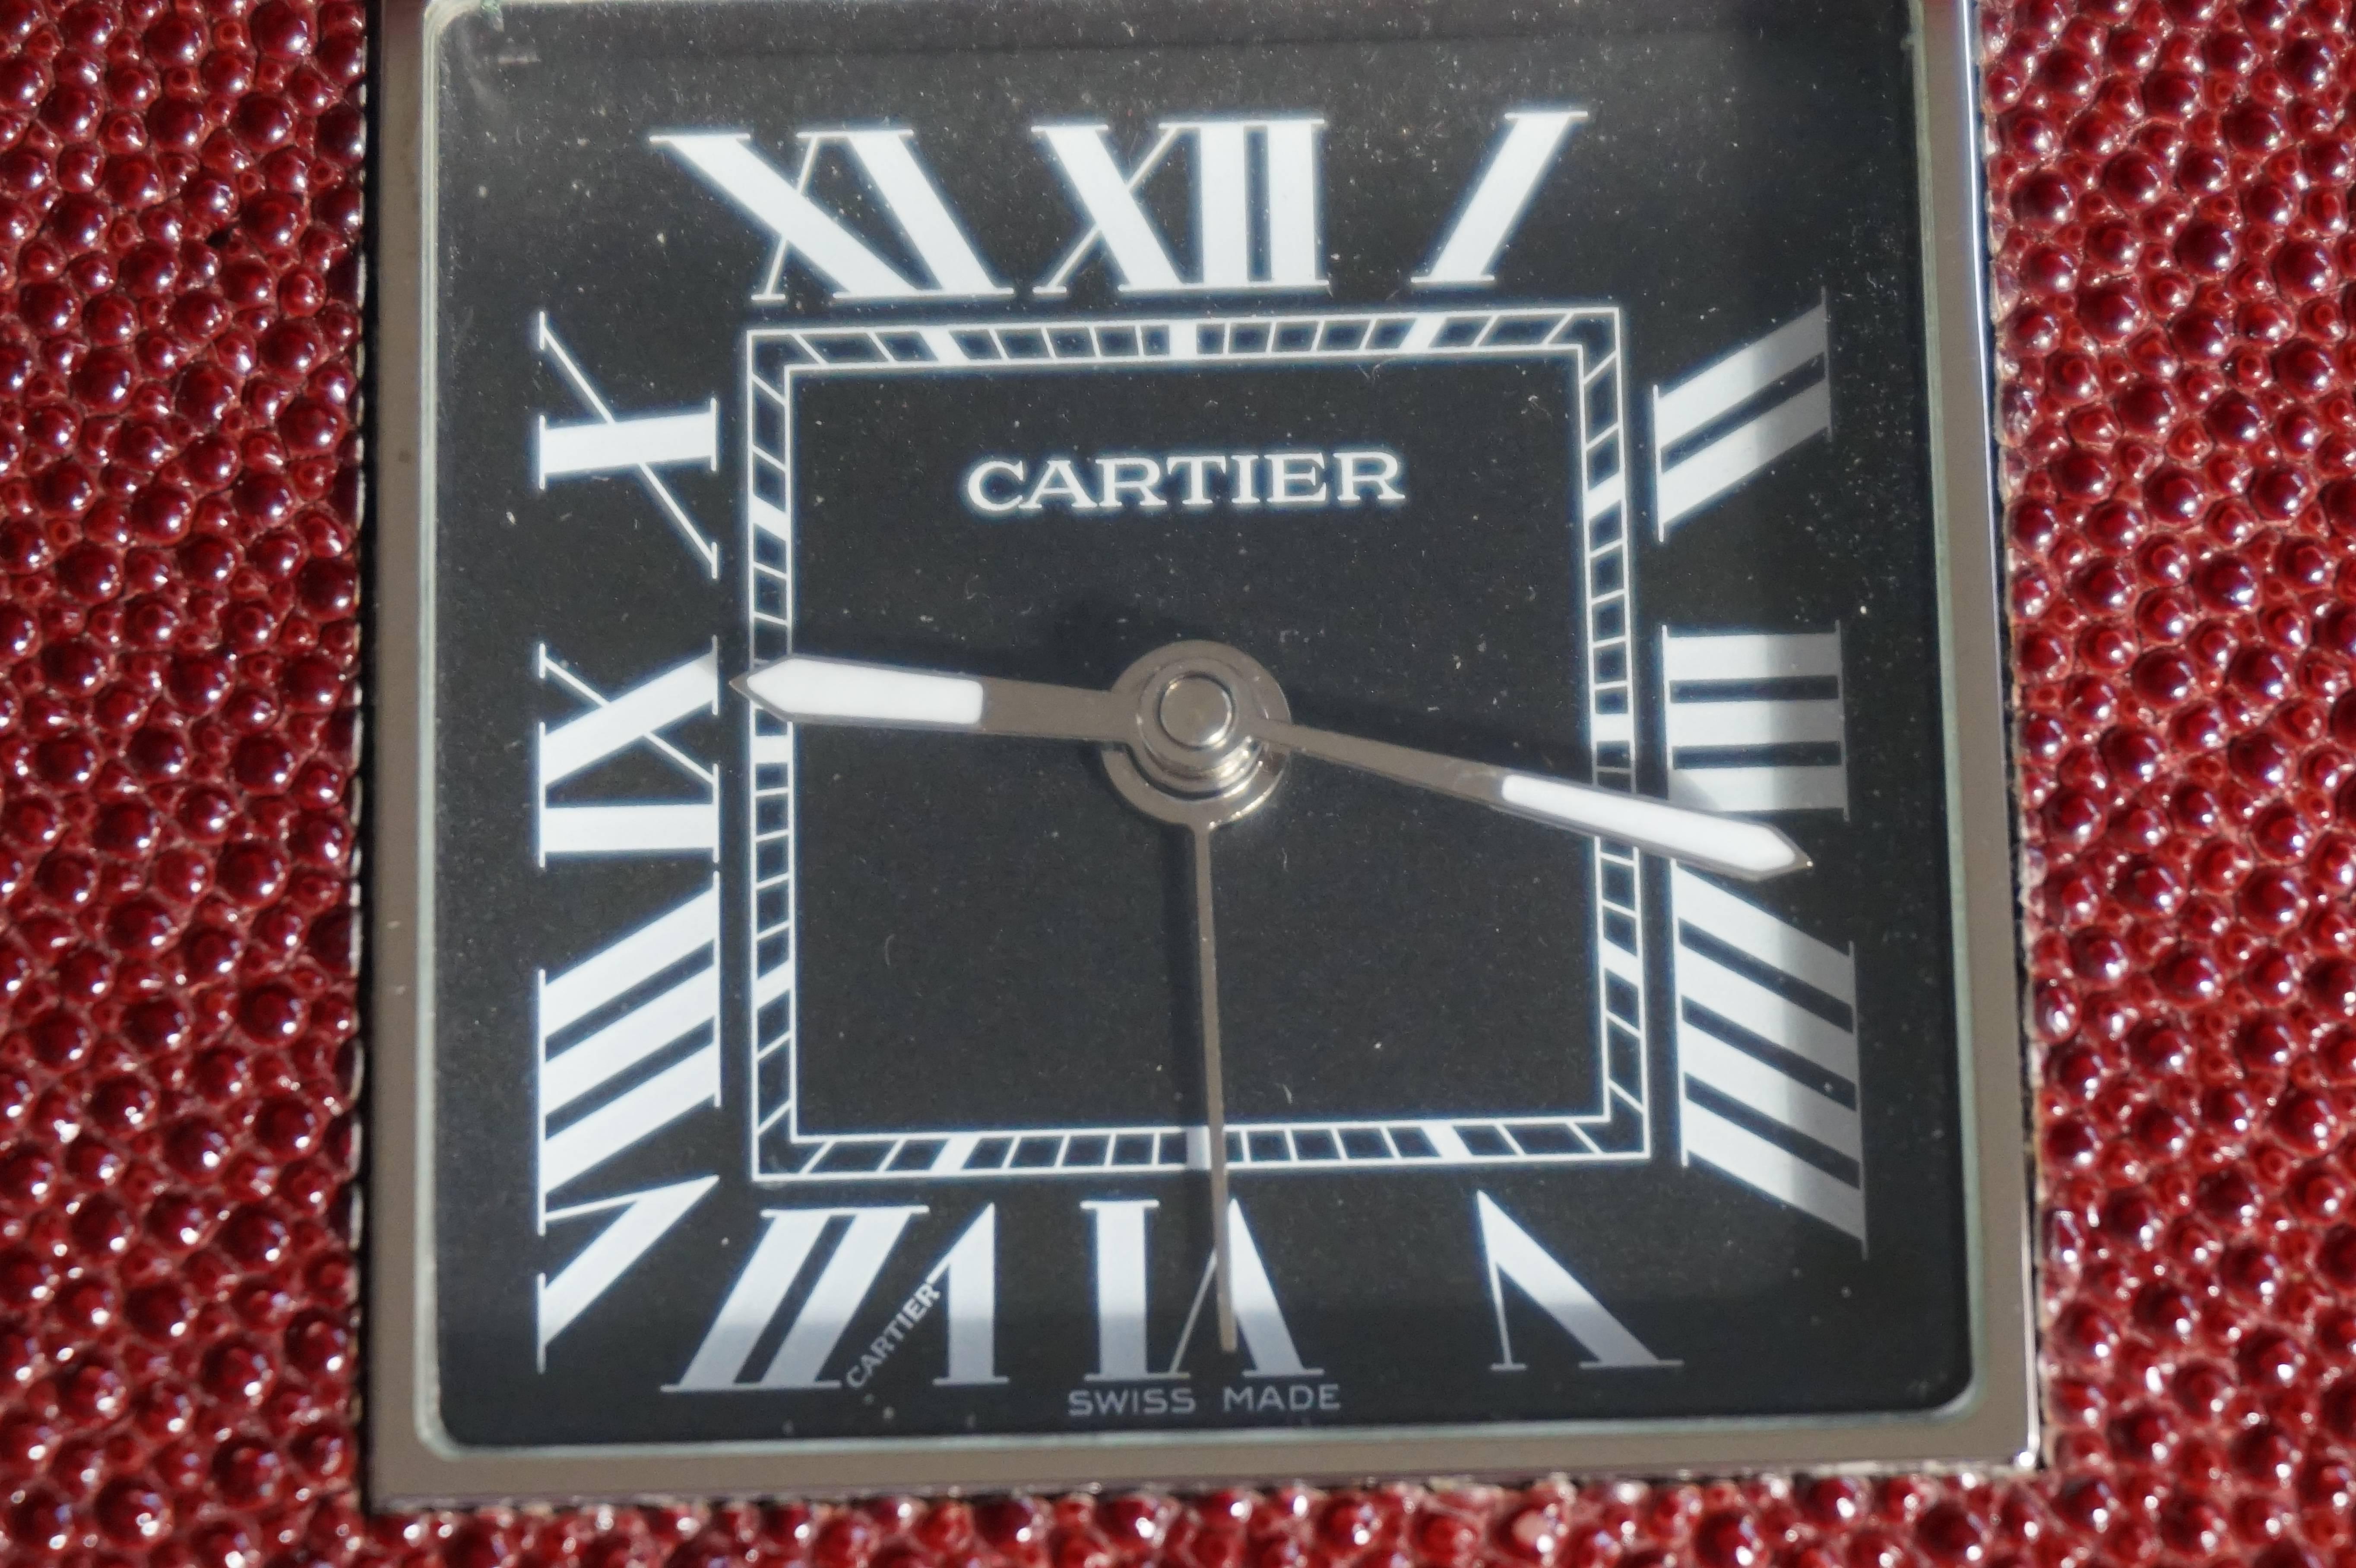 French Art Deco Style Cartier Table, Desk Traveling Clock in Original Mint Leather Box